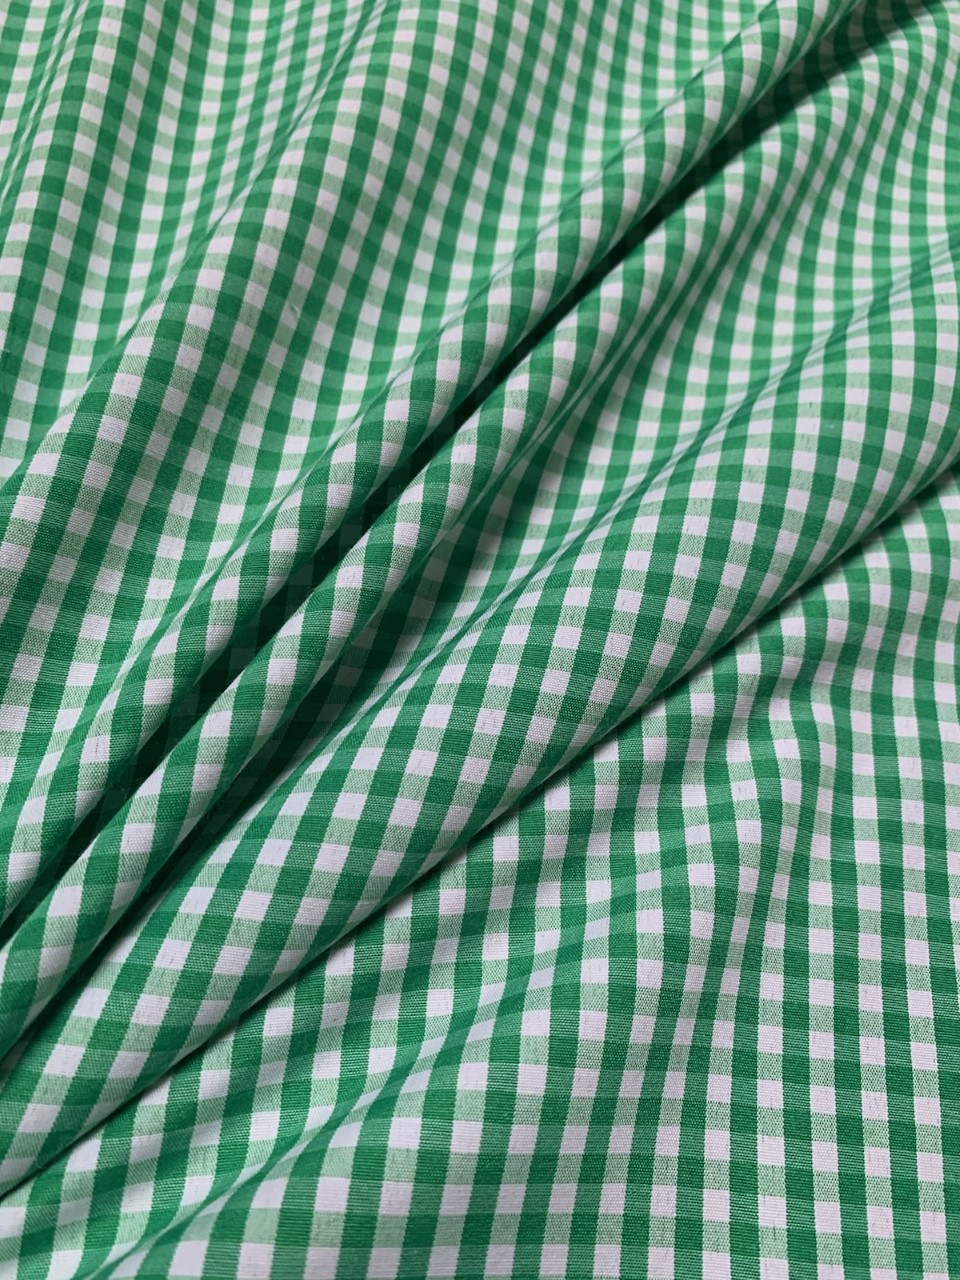 1/8" Kelly Gingham Fabric 60" Wide By The Yard Poly Cotton Blend